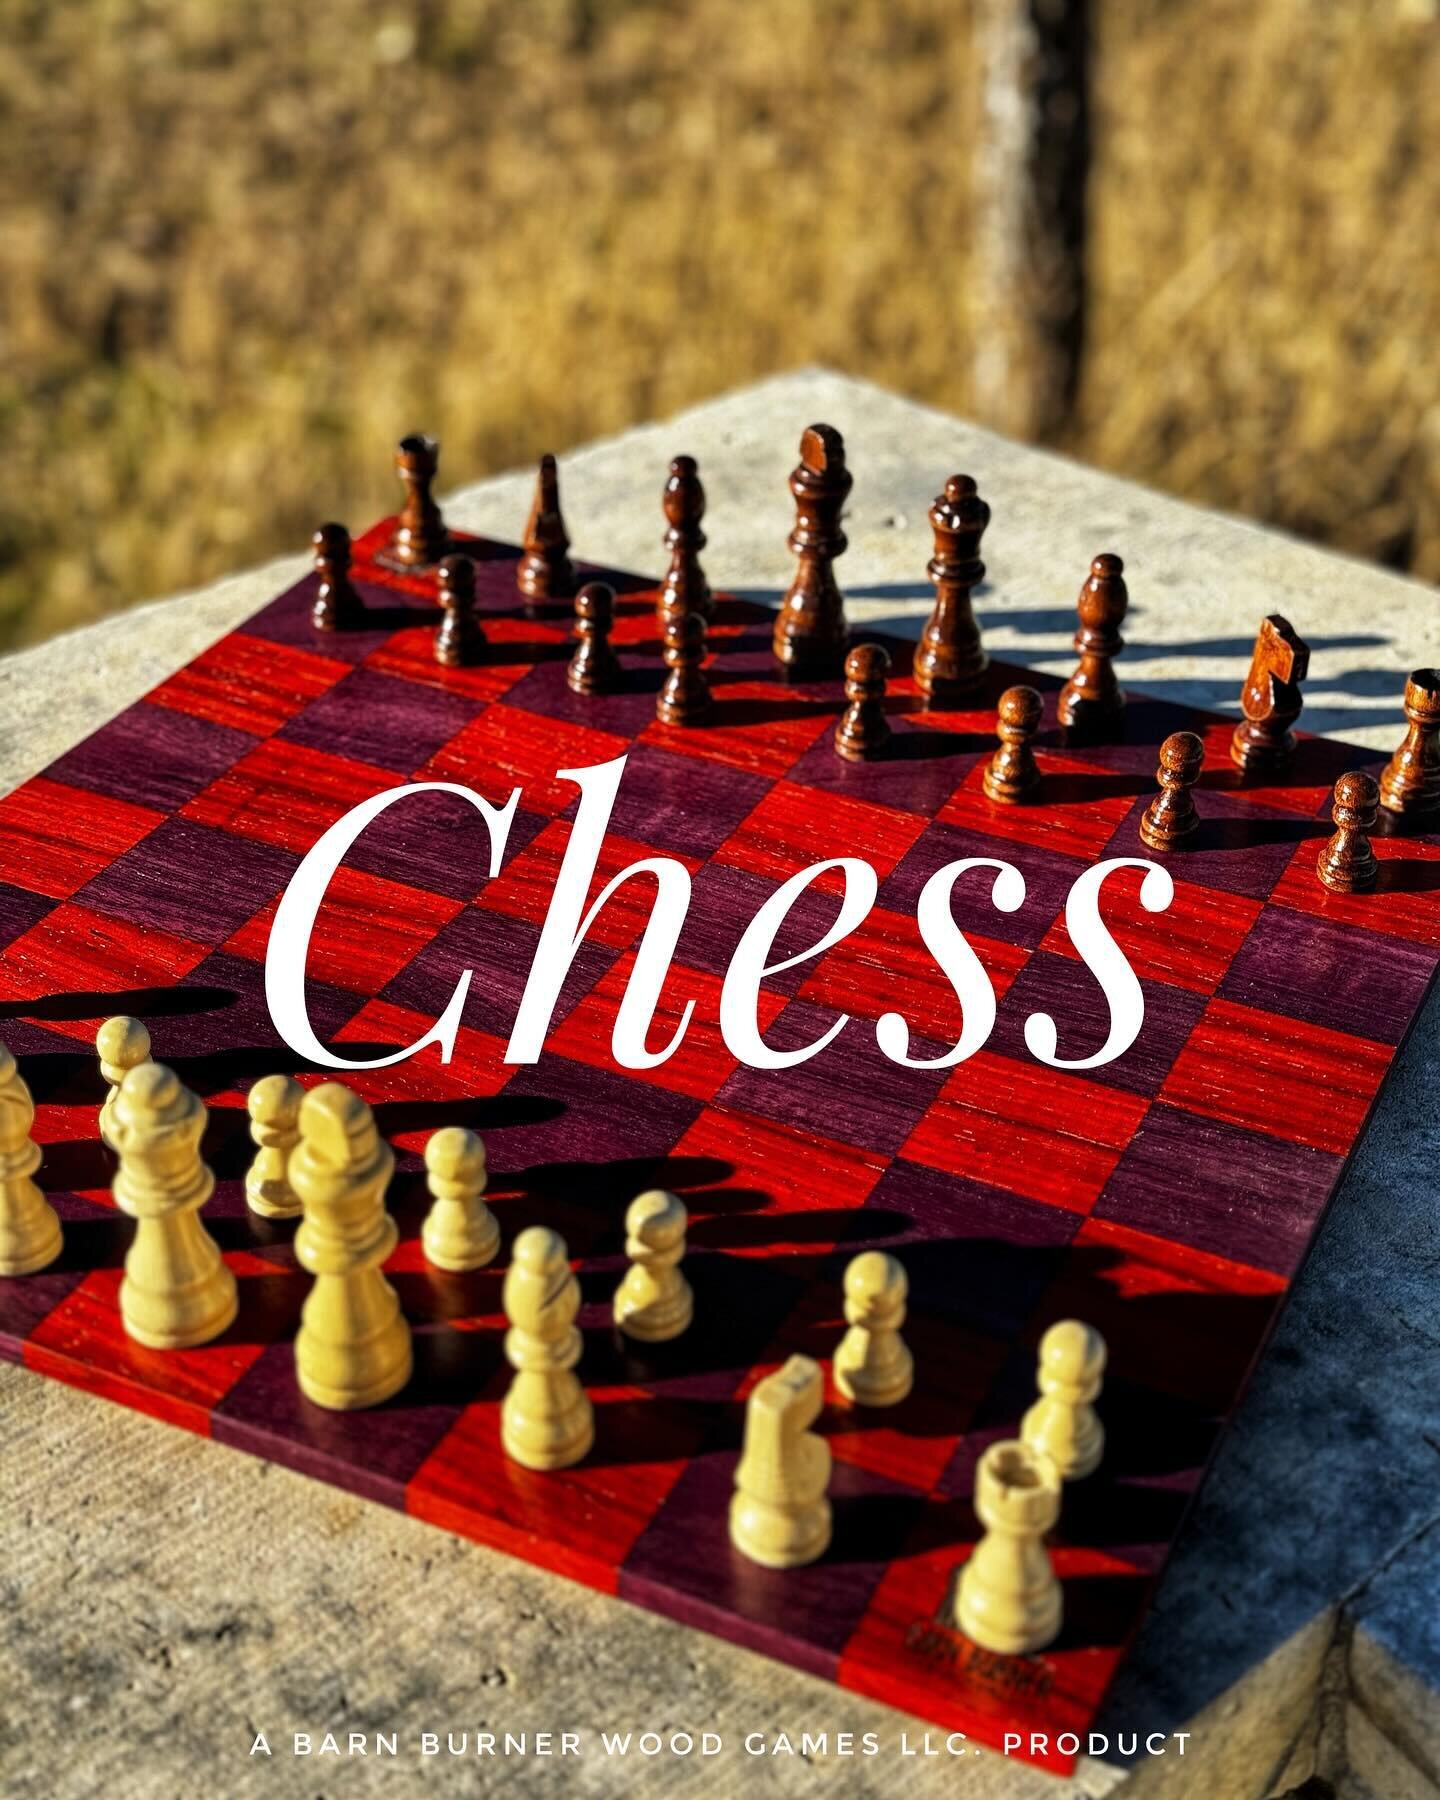 🔥Game Time🔥

Name: Chess

Type: Interactive, competition

Play Style: 1 vs. 1

Category: indoor / outdoor
_______________________________________________

Embark on a global journey through the centuries with chess &ndash; a game that traveled the 